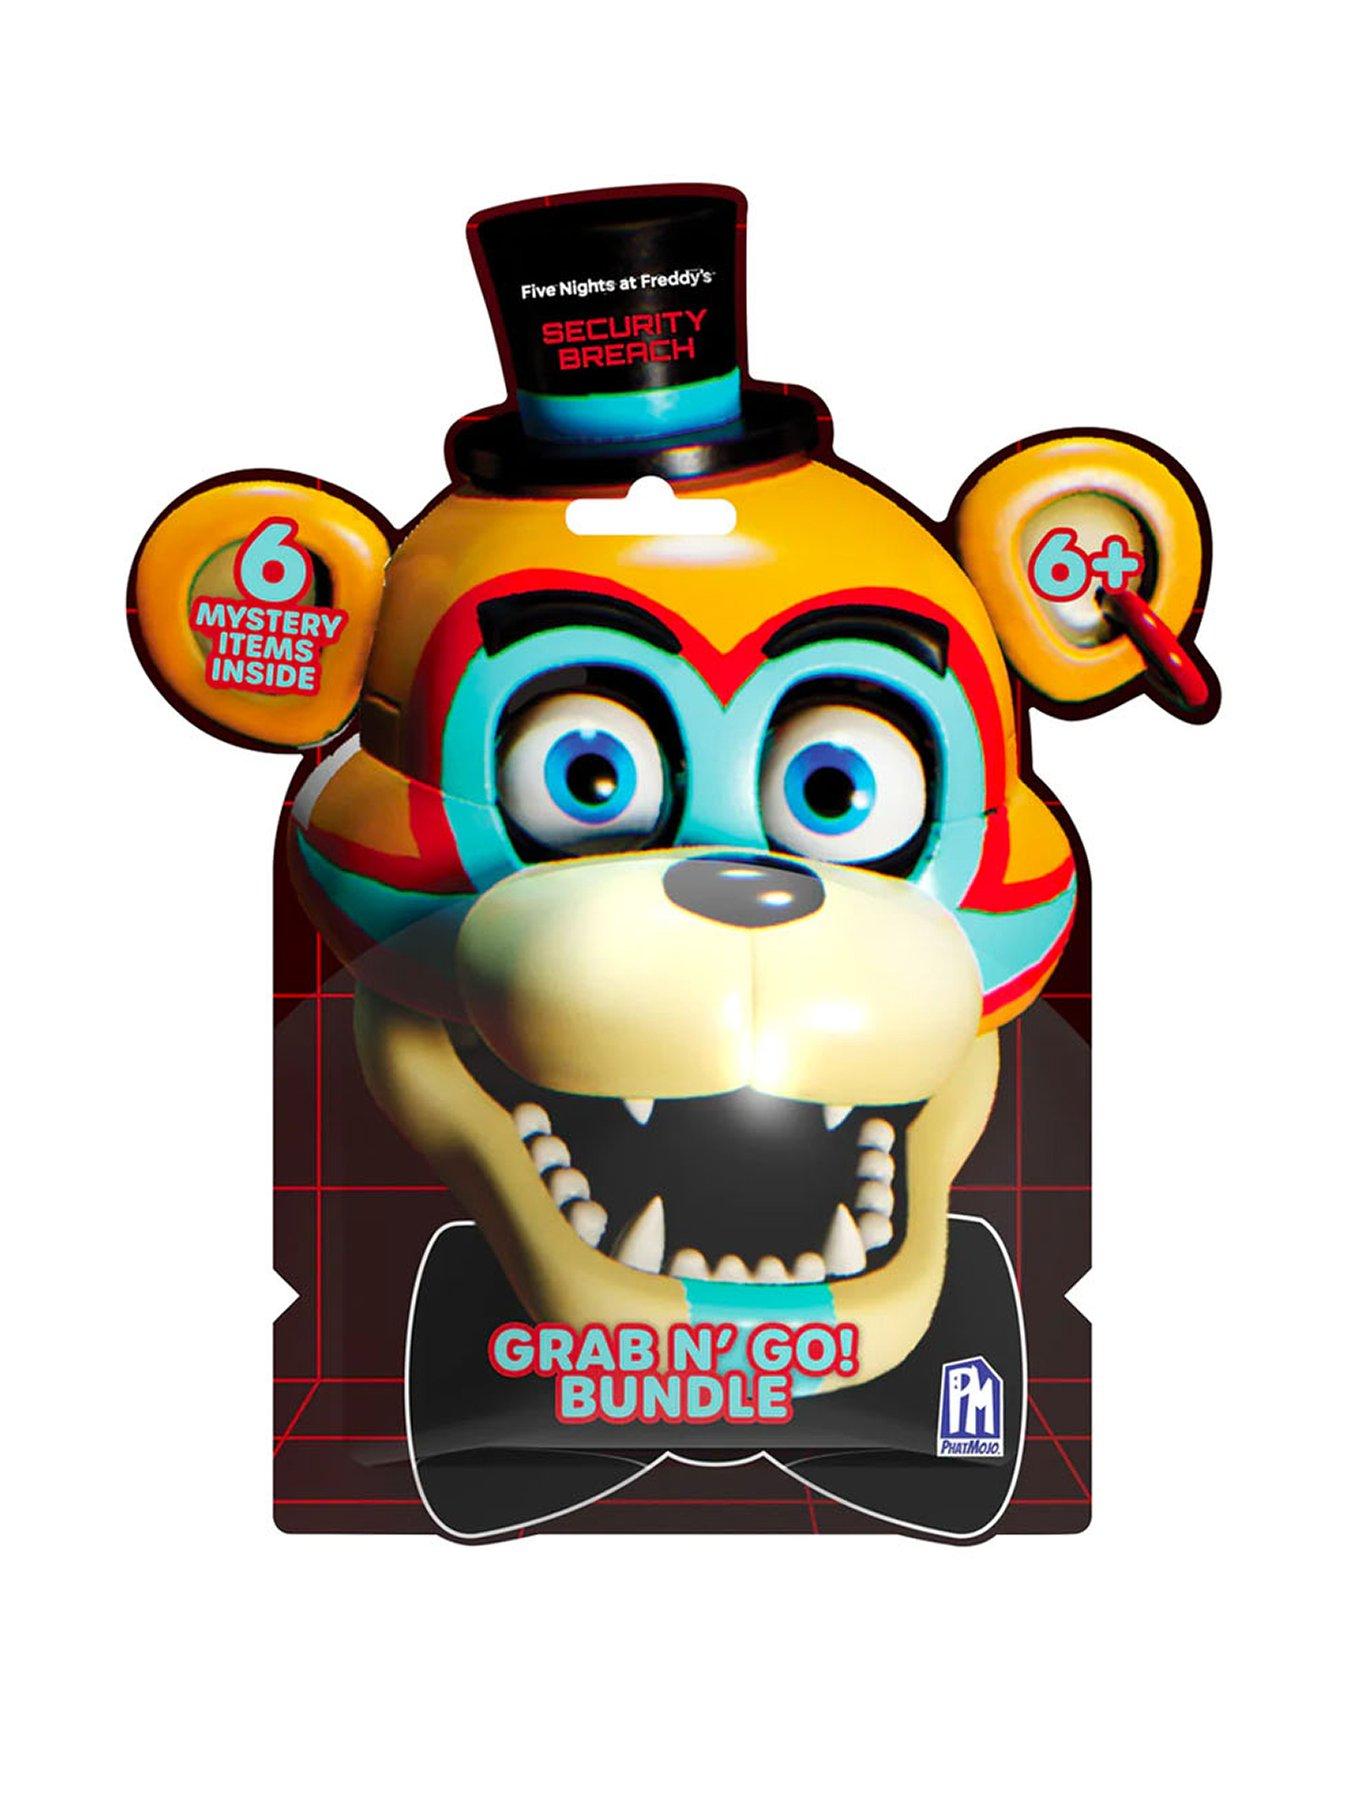 Sensory review of Five Nights at Freddy's: Security Breach – Sensory Access